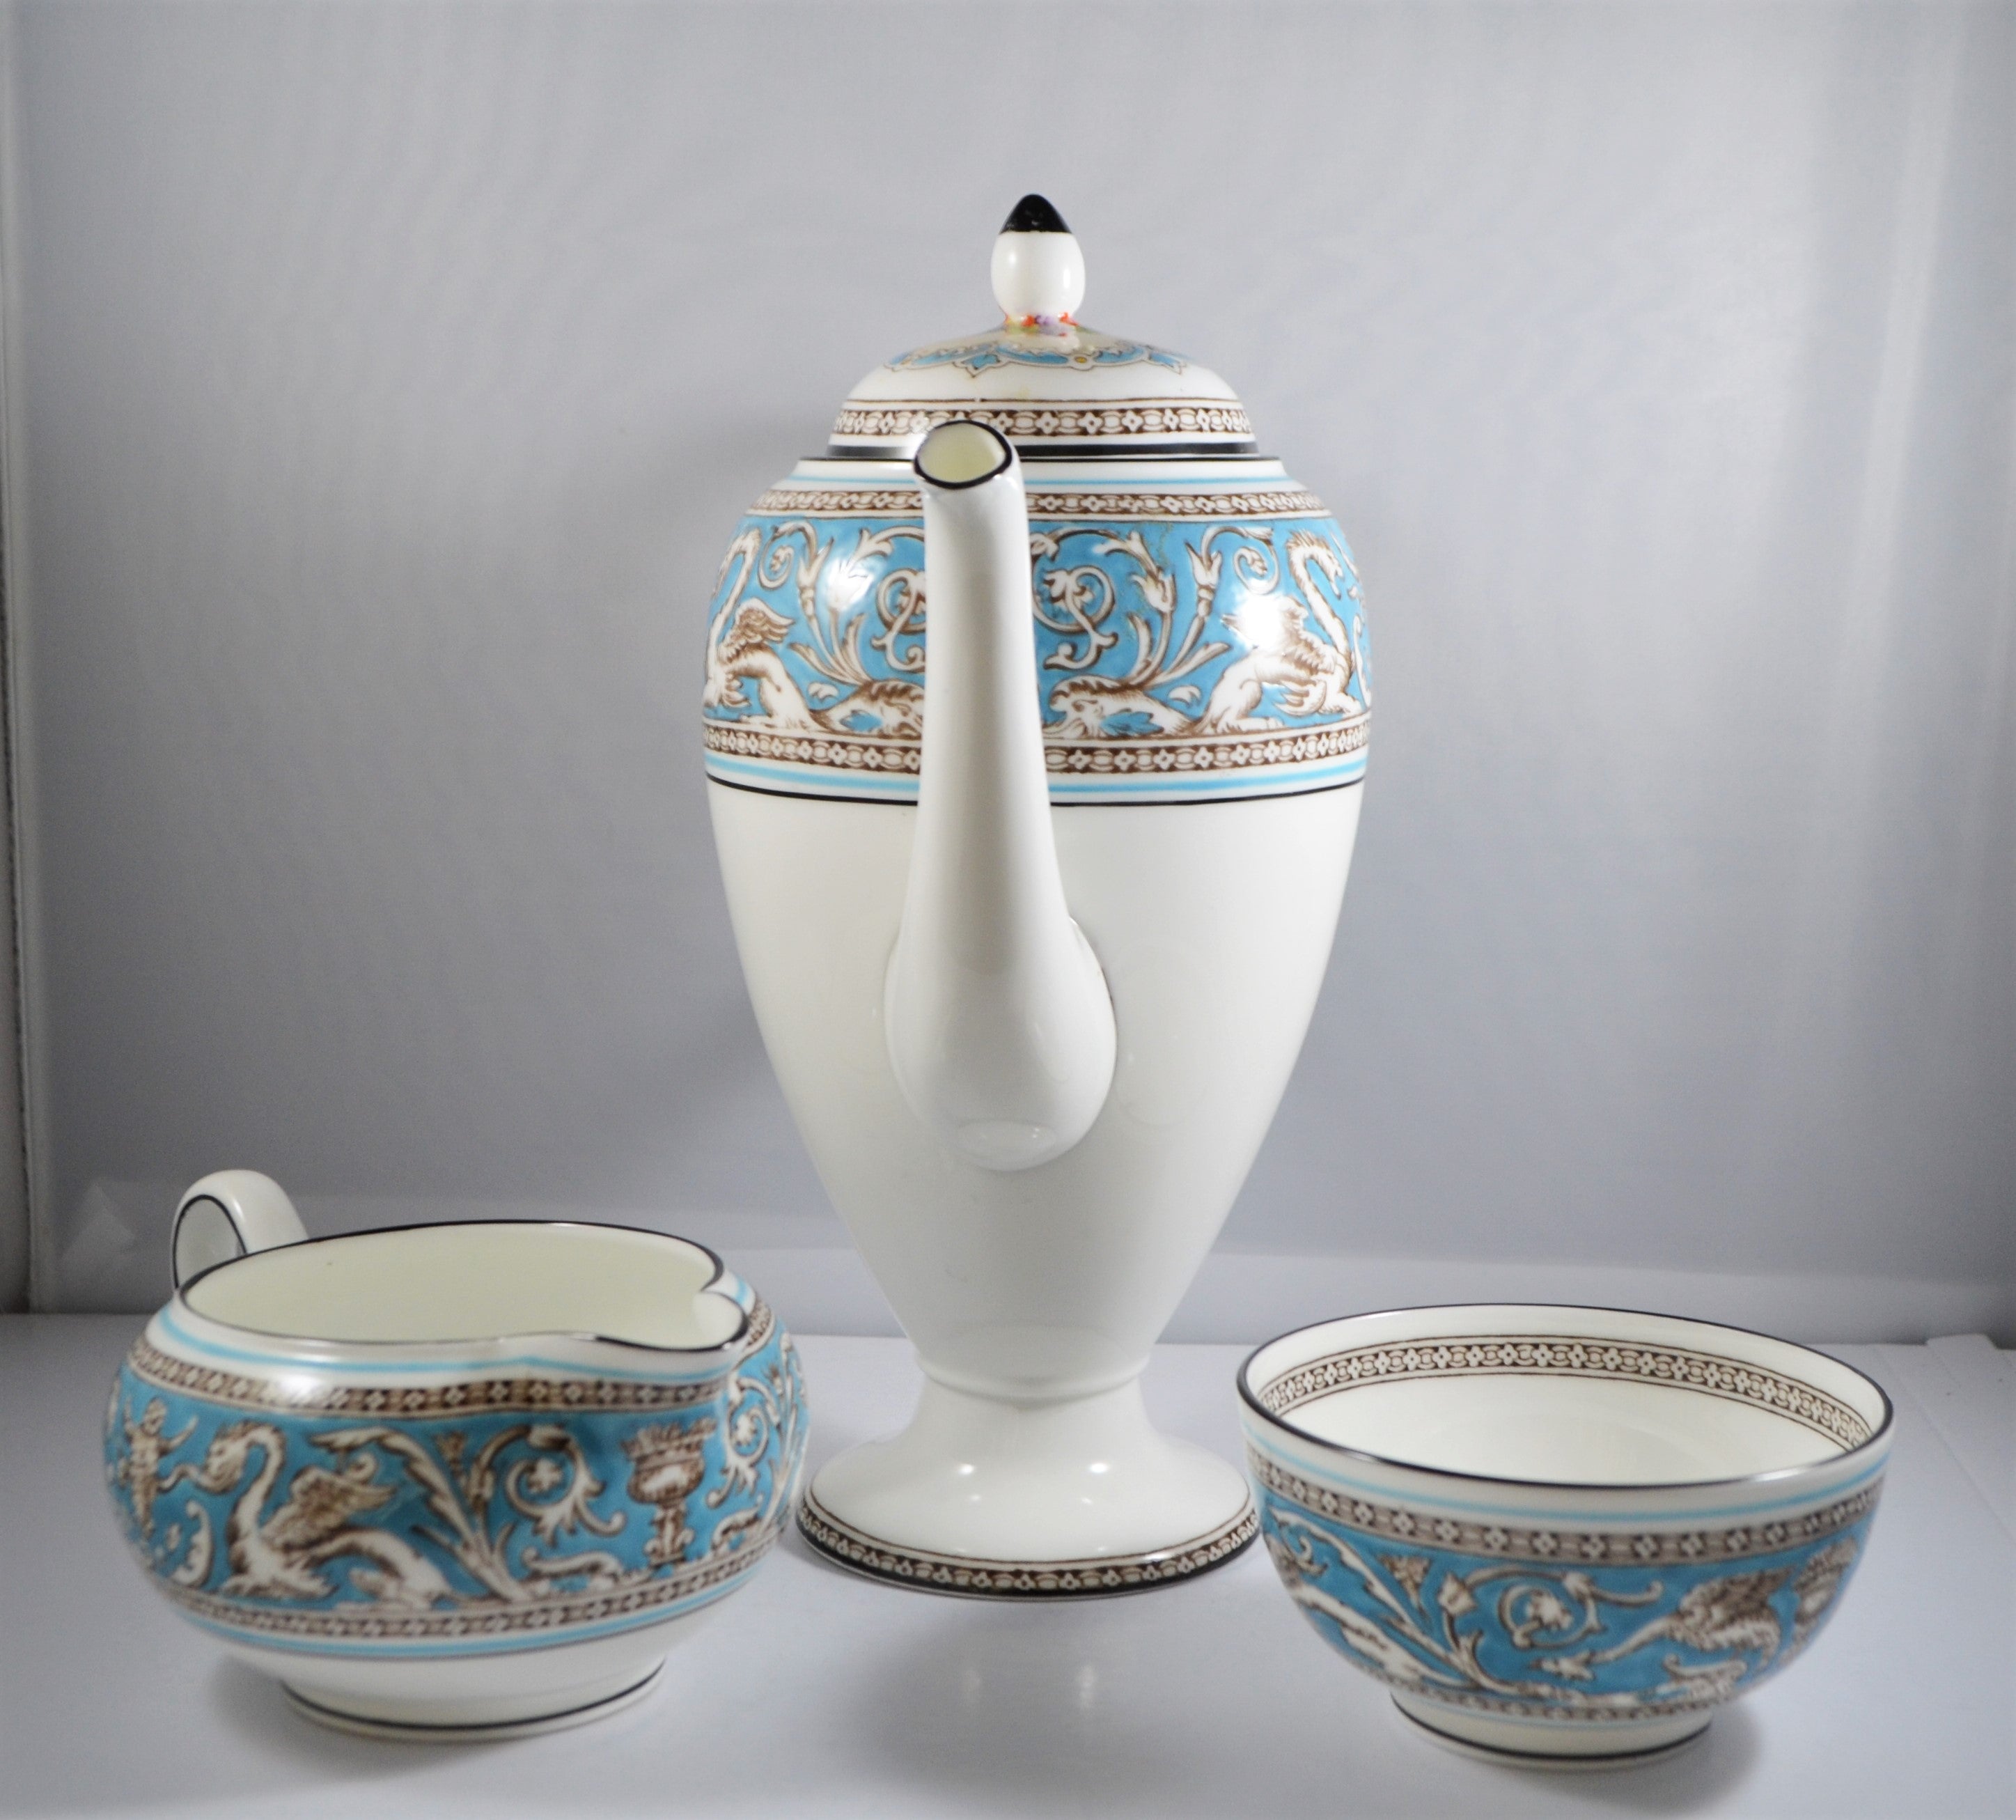 At Auction: Mid century china - Wedgwood coffee pot made in England, serving  plates by Figgio made in Norway, Mikasa made in Japan, etc. Coffee pot  approx 20cm high